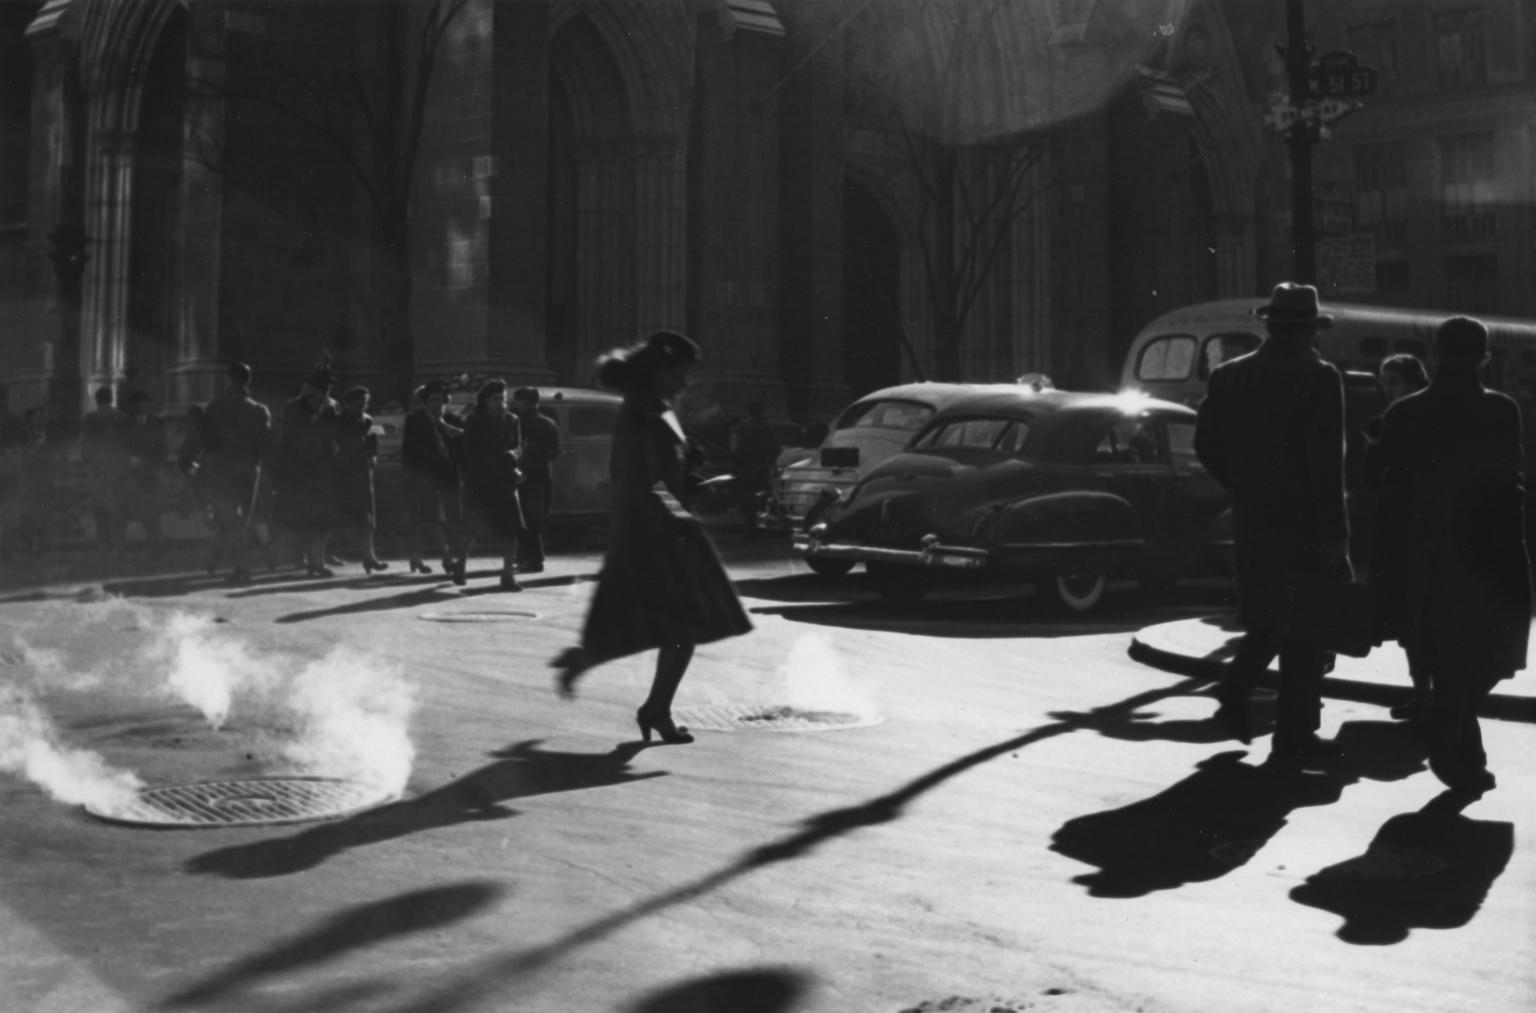 Photograph of woman in a dress and hat walking across a city street with cars, people, and buildings in the background.